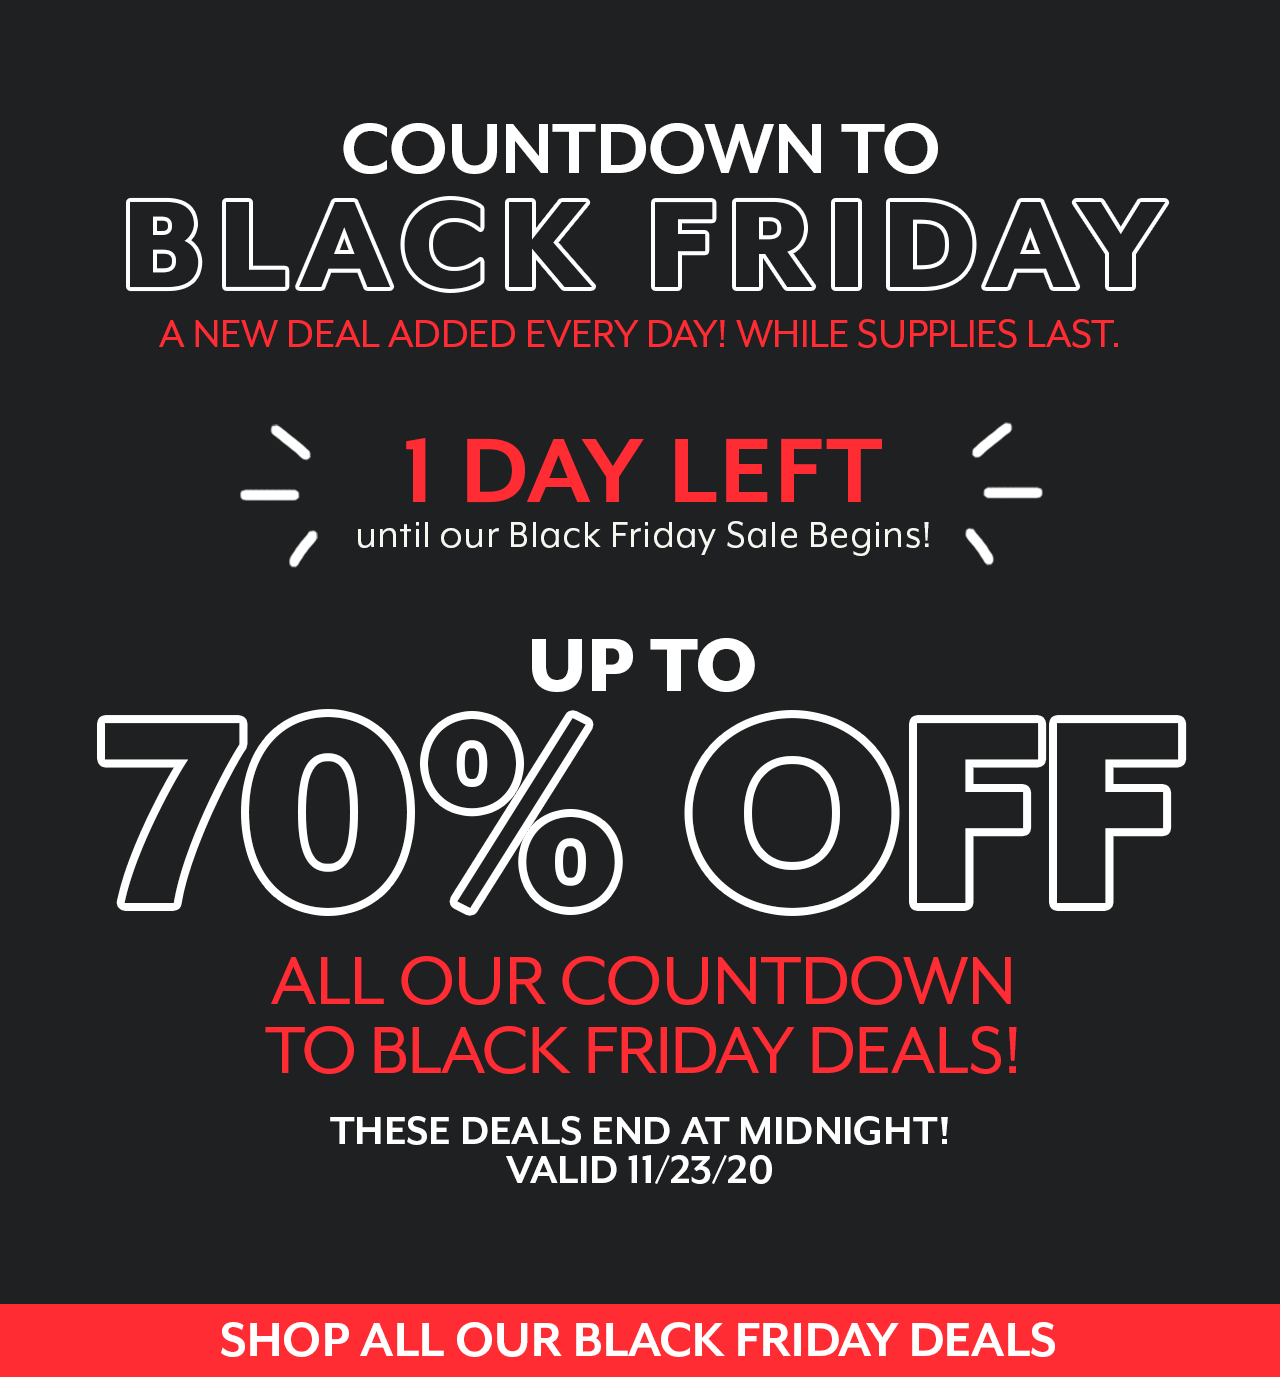 Up to 70% off all of our Countdown to Black Friday Deals. They end at midnight.